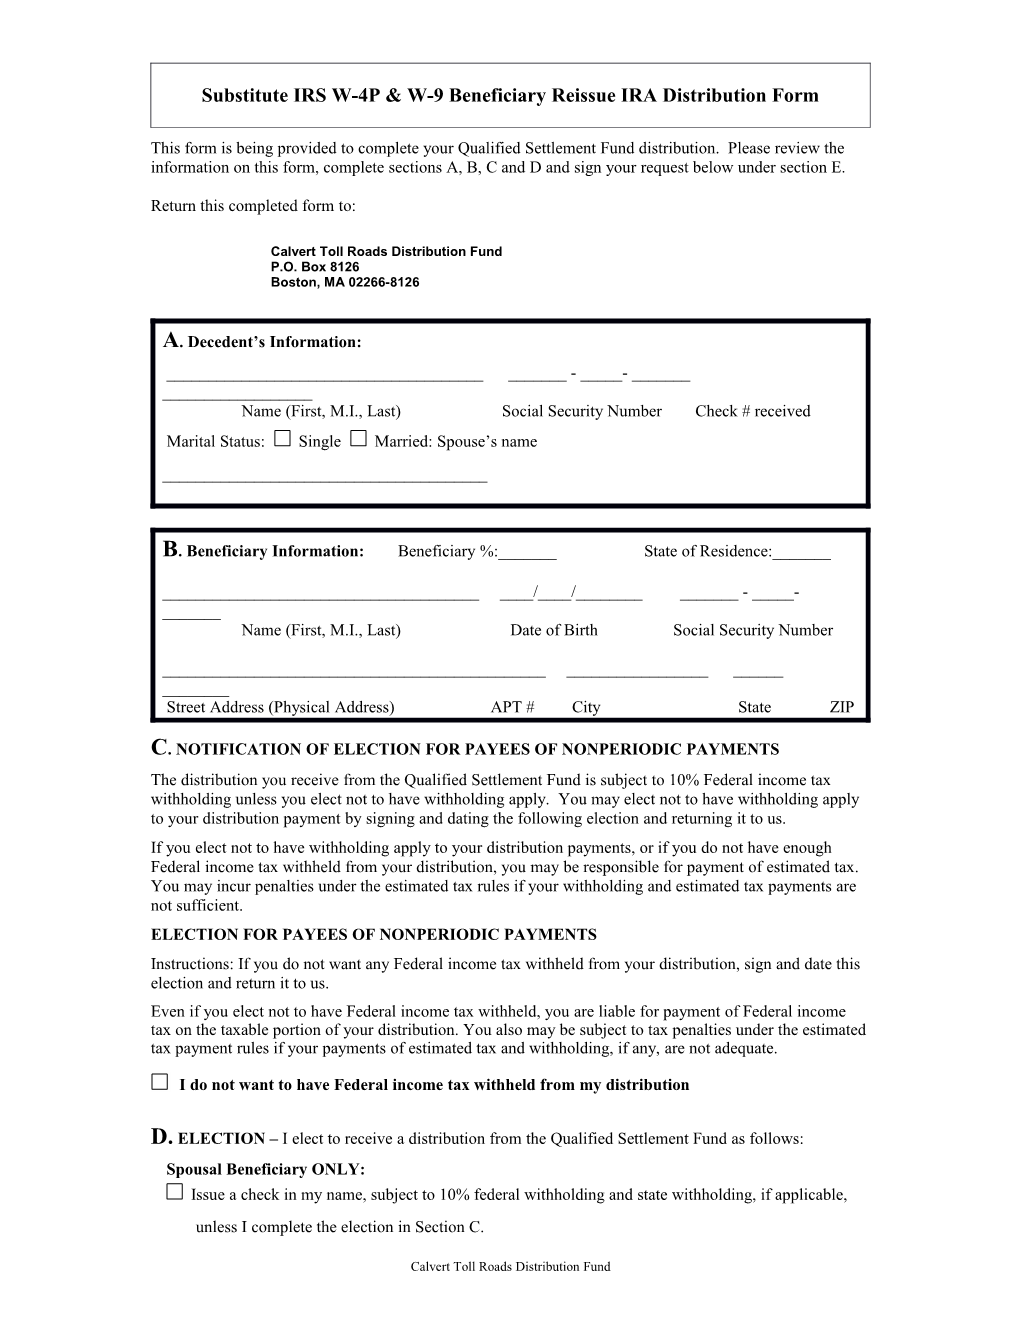 Substitute IRS W-4P & W-9 Beneficiary Reissue IRA Distribution Form